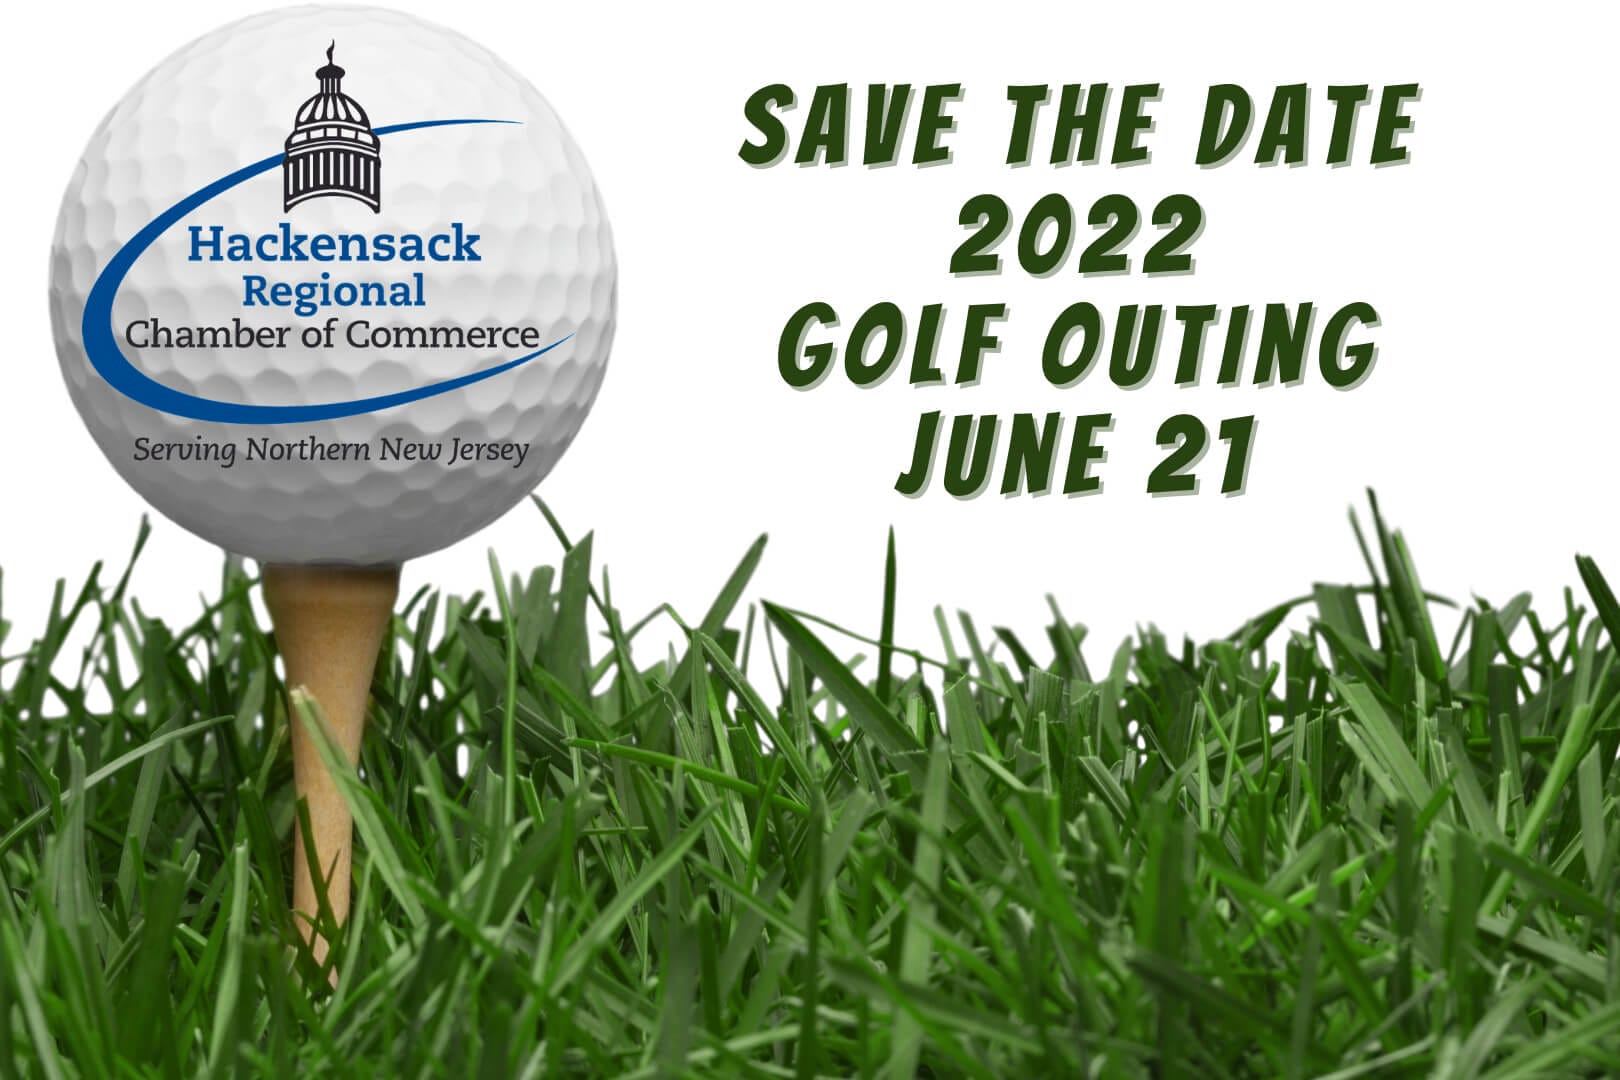 Hack Golf Save the Date